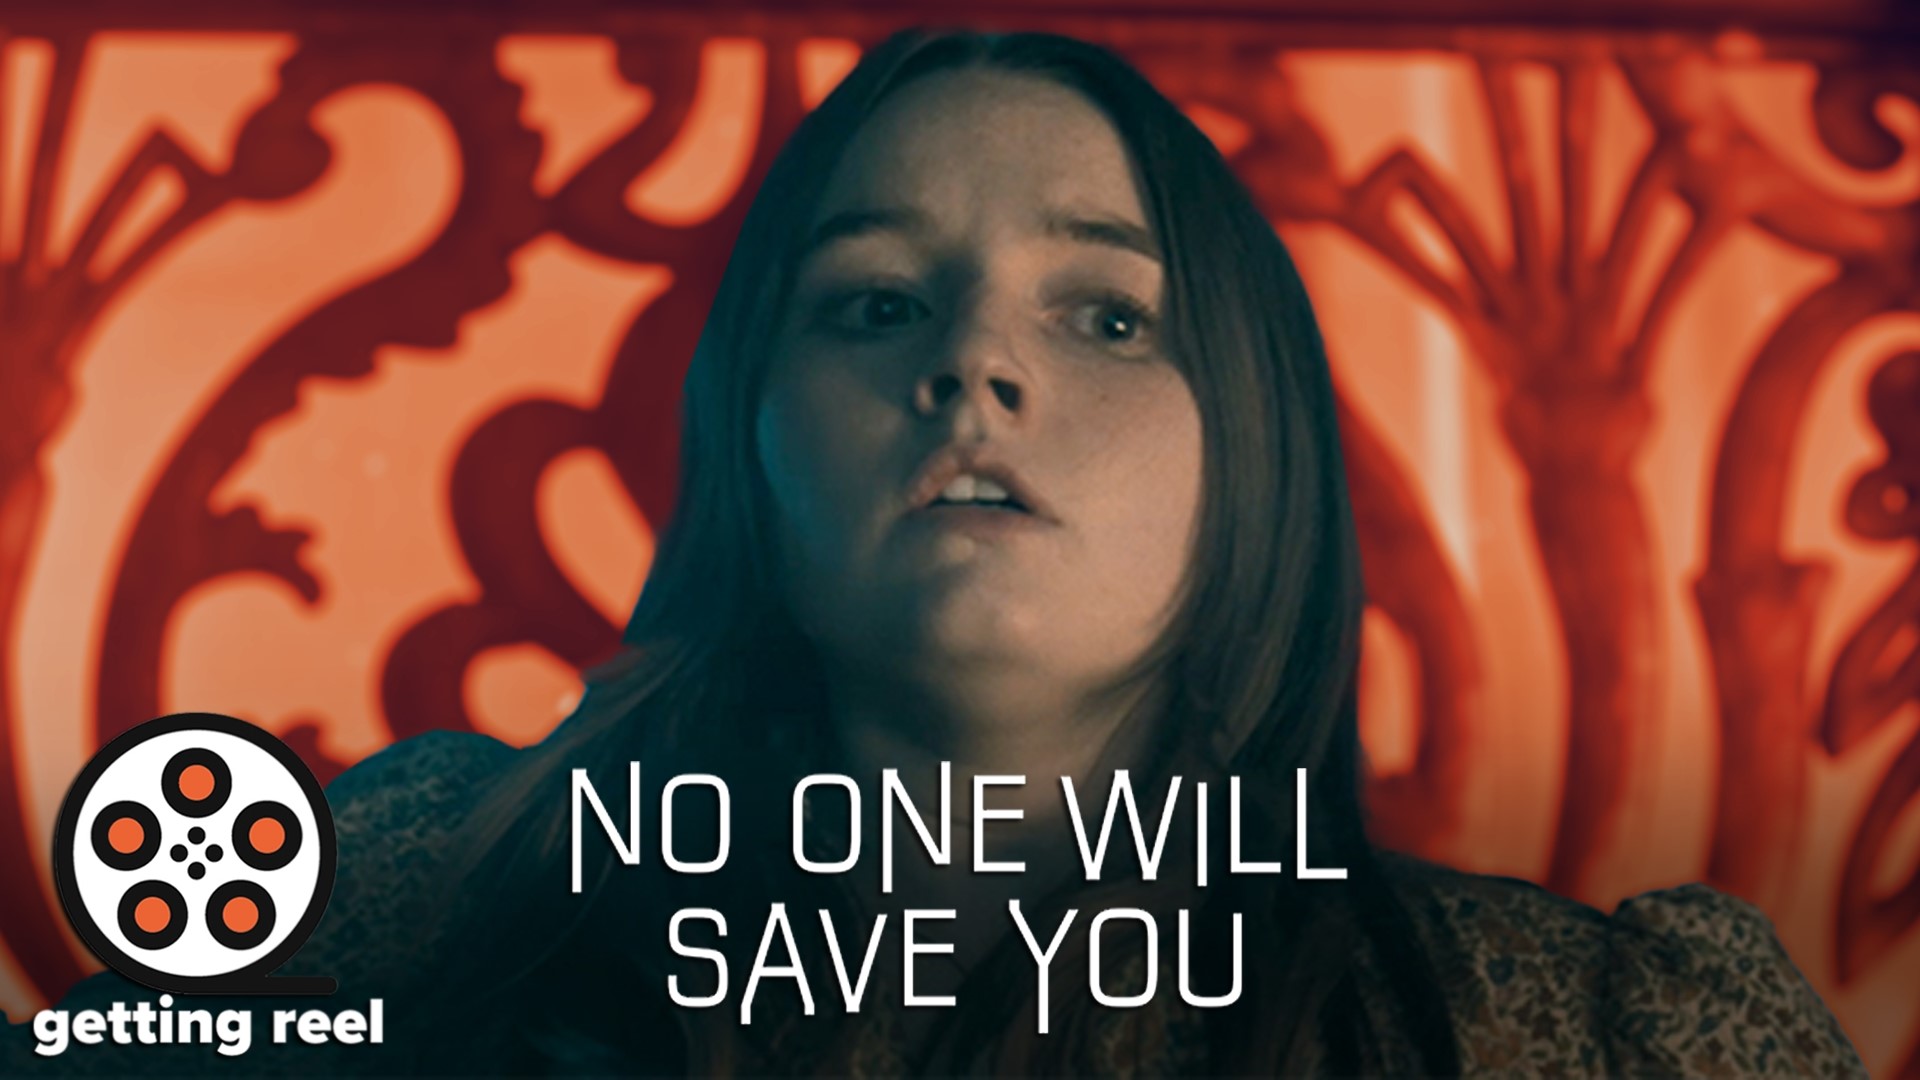 JD stops by to give a quick review of No One Will Save You and a preview of The Creator, another upcoming sci-fi movie!